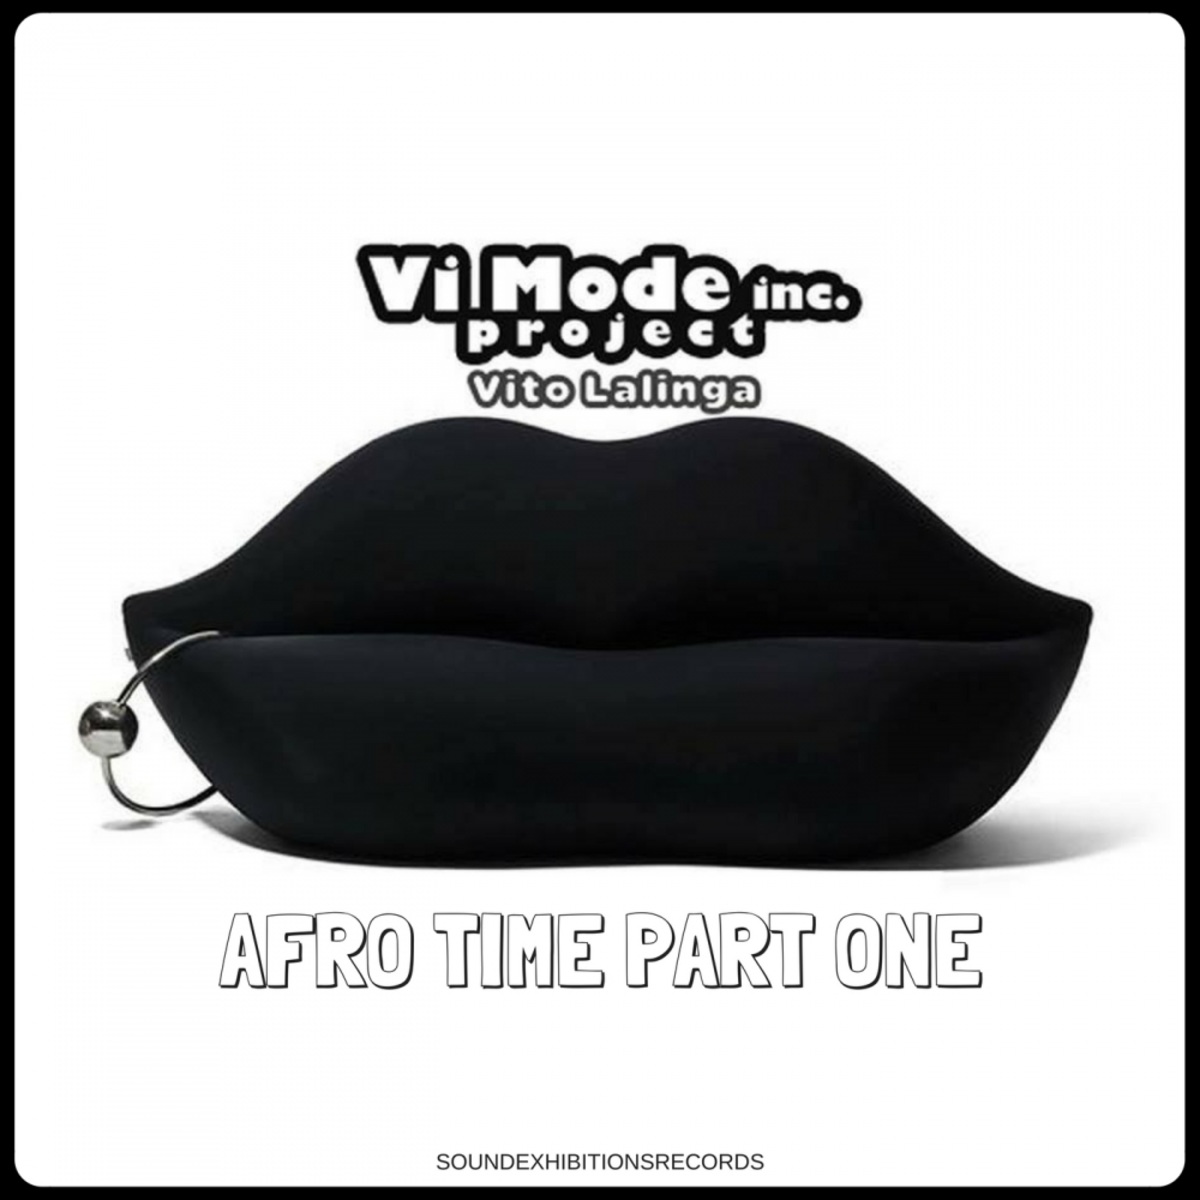 Vito Lalinga (Vi Mode Inc. Project) - Afro Time Part One / Sound-Exhibitions-Records